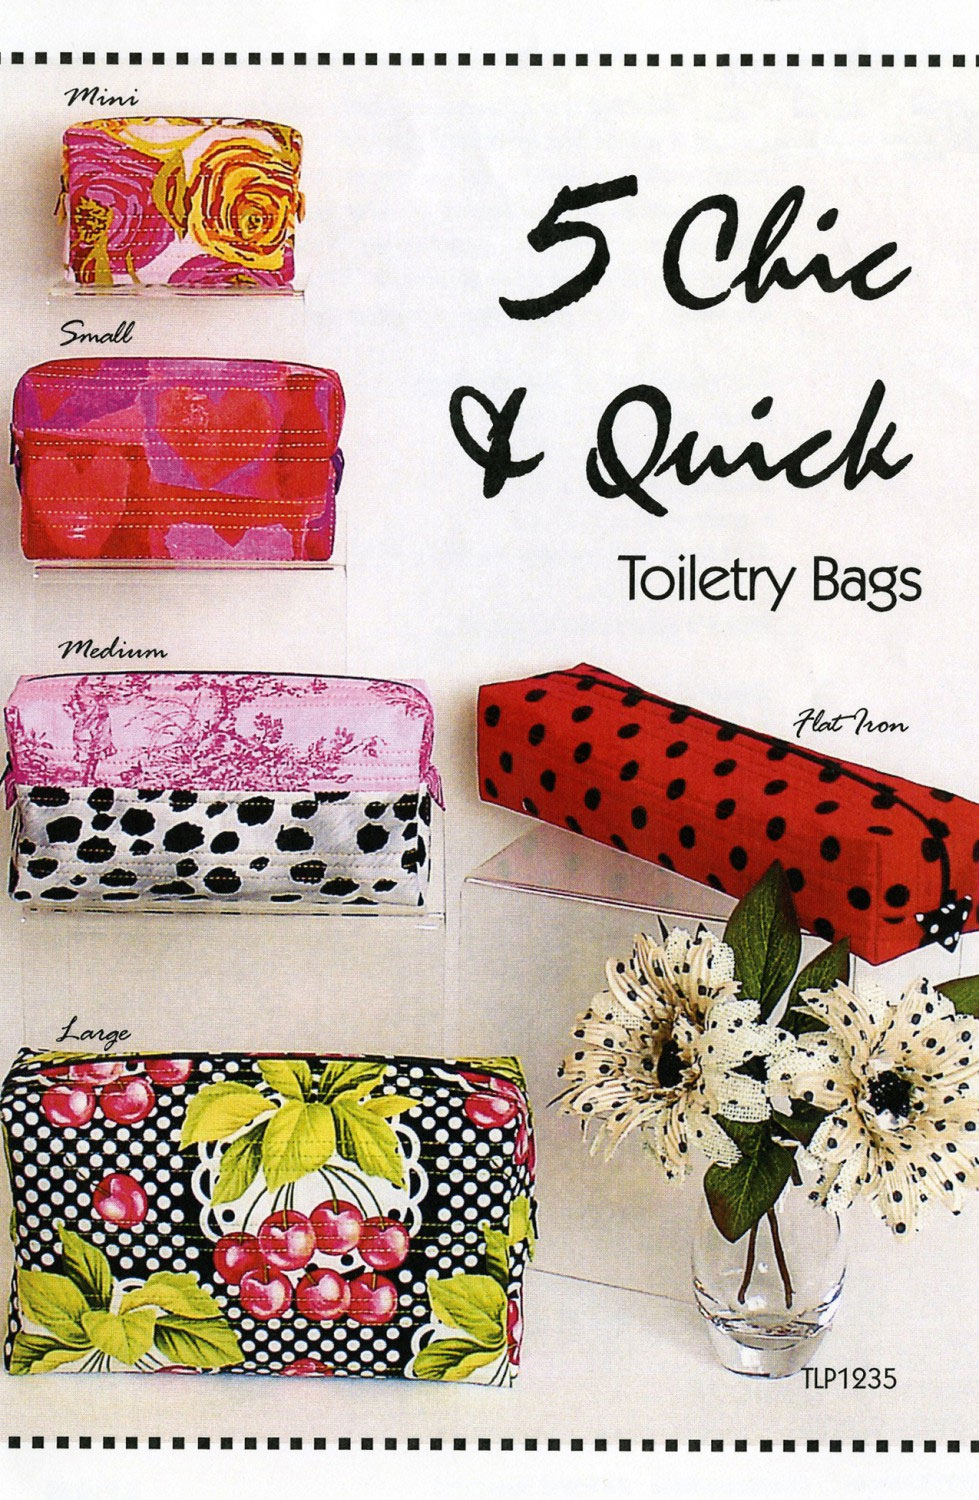 5-Chic-and-quick-toiletry-bags-sewing-pattern-Tiger-Lily-Press-front